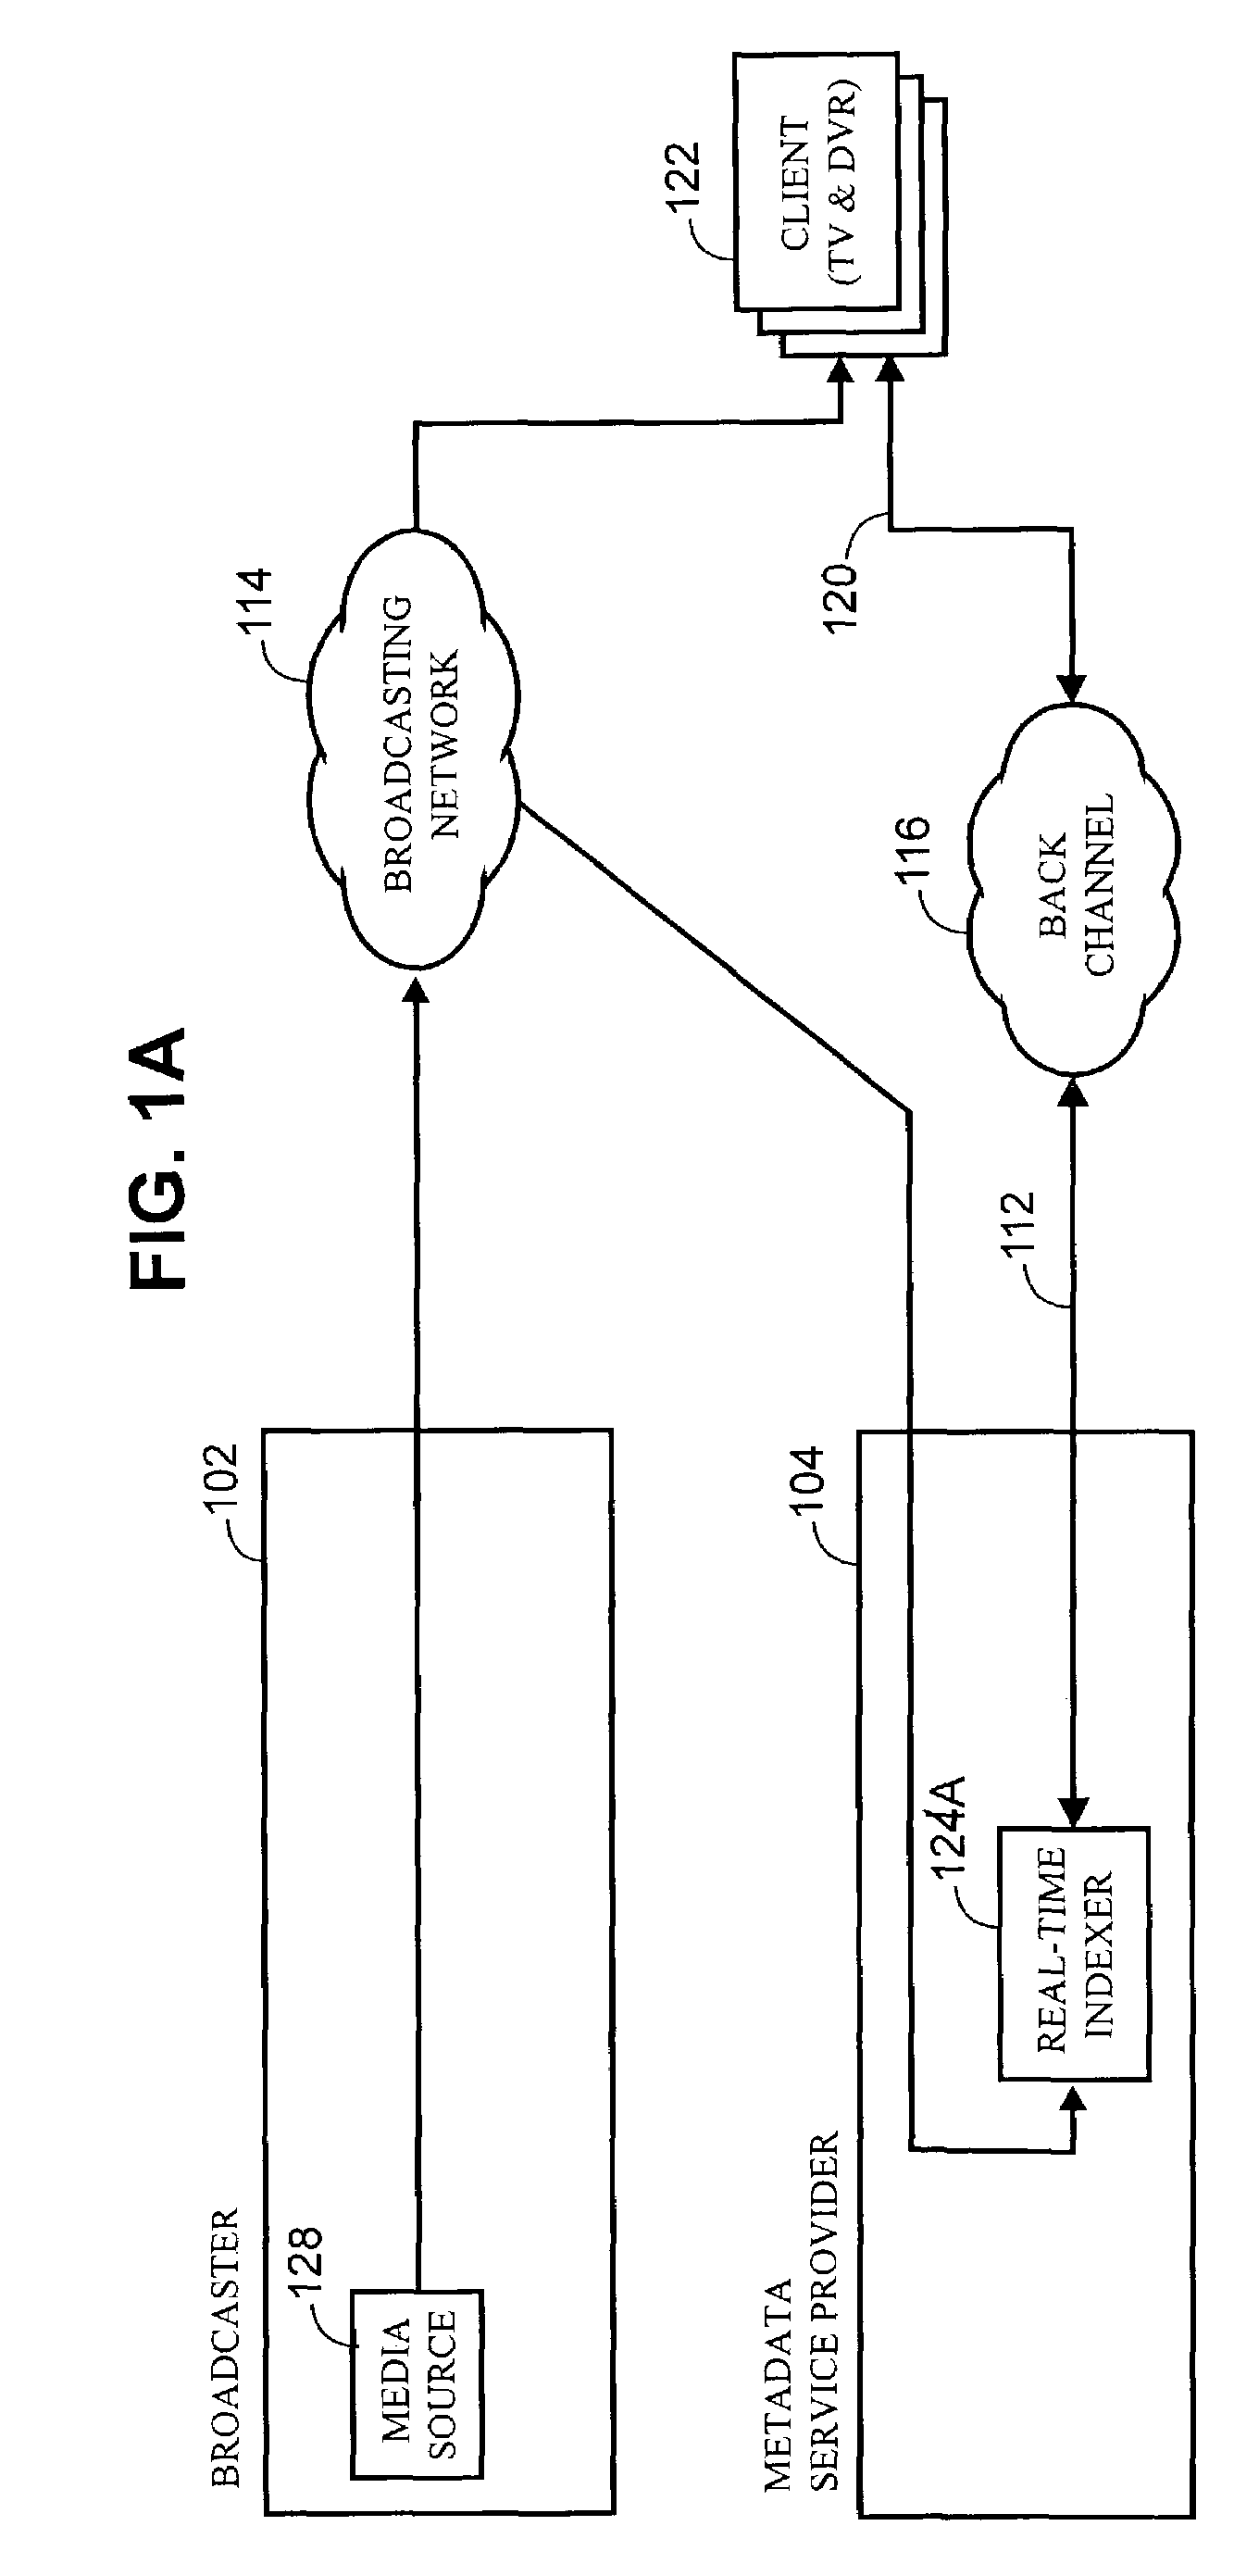 Method and apparatus for fast metadata generation, delivery and access for live broadcast program